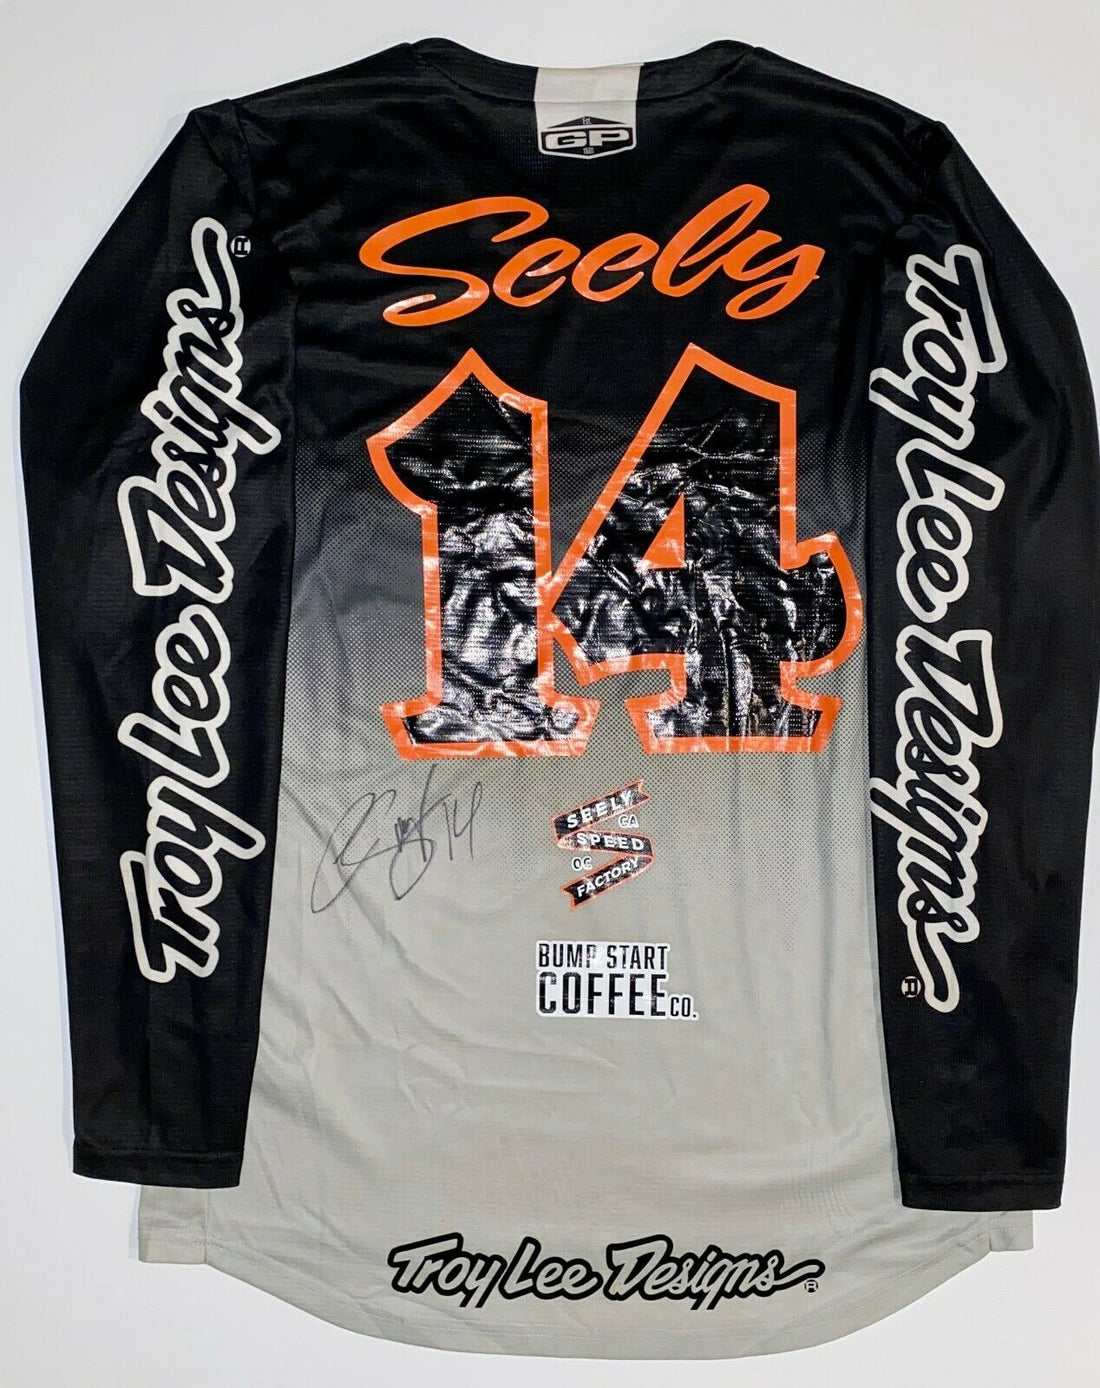 Road2Recovery: Cole Seely Autographed Race Worn Jersey & Pants Auction Featured Image